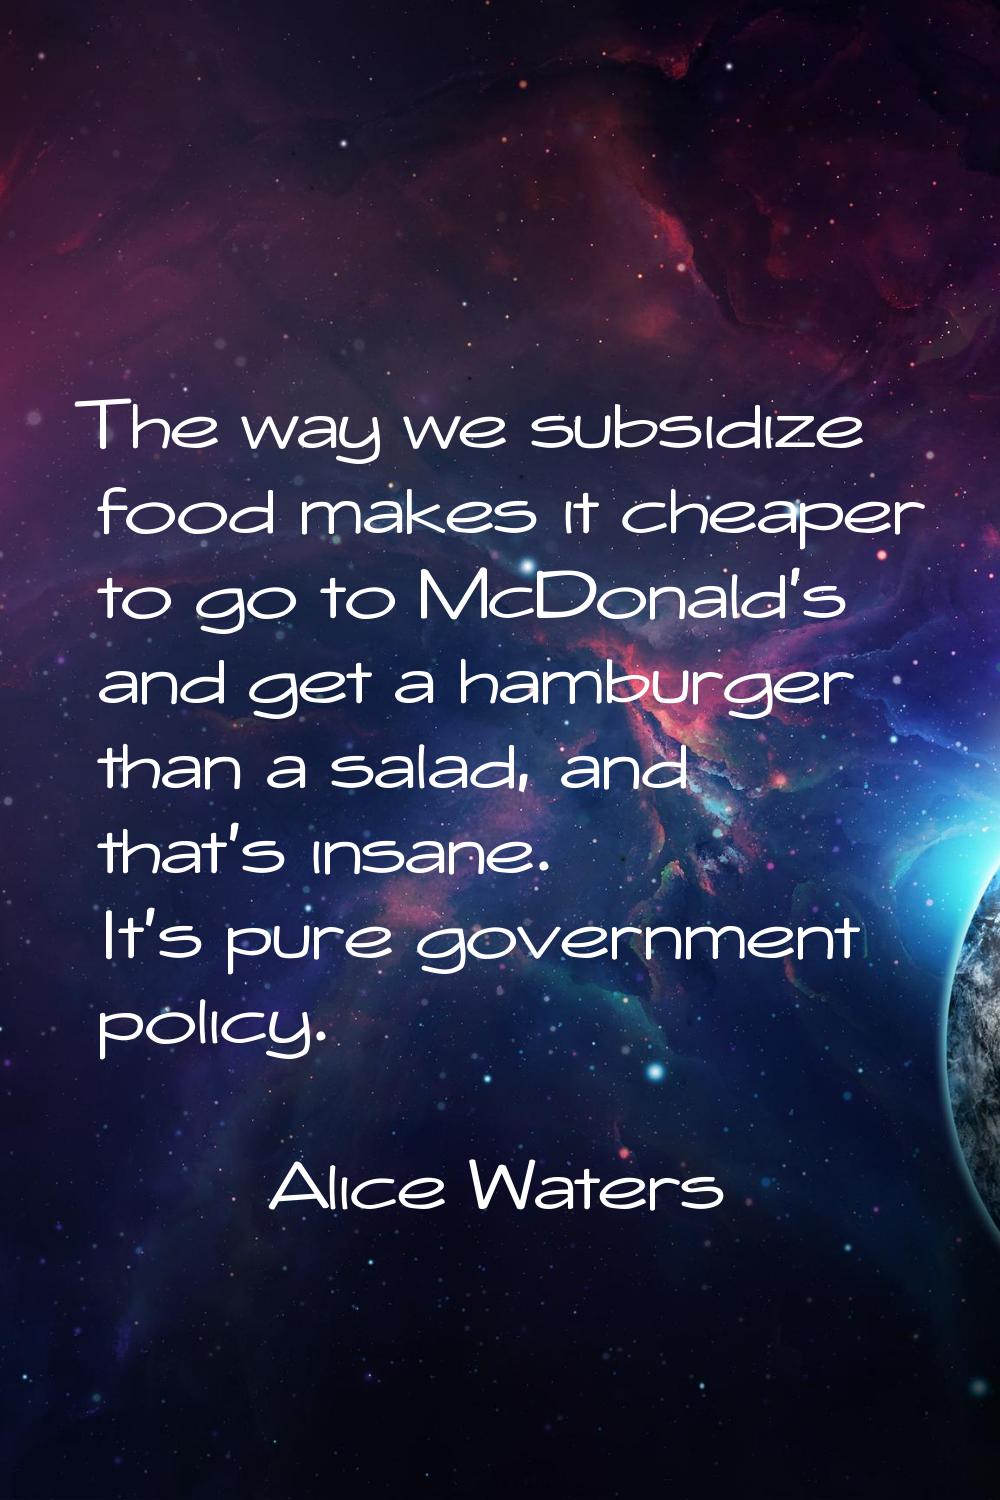 The way we subsidize food makes it cheaper to go to McDonald's and get a hamburger than a salad, an